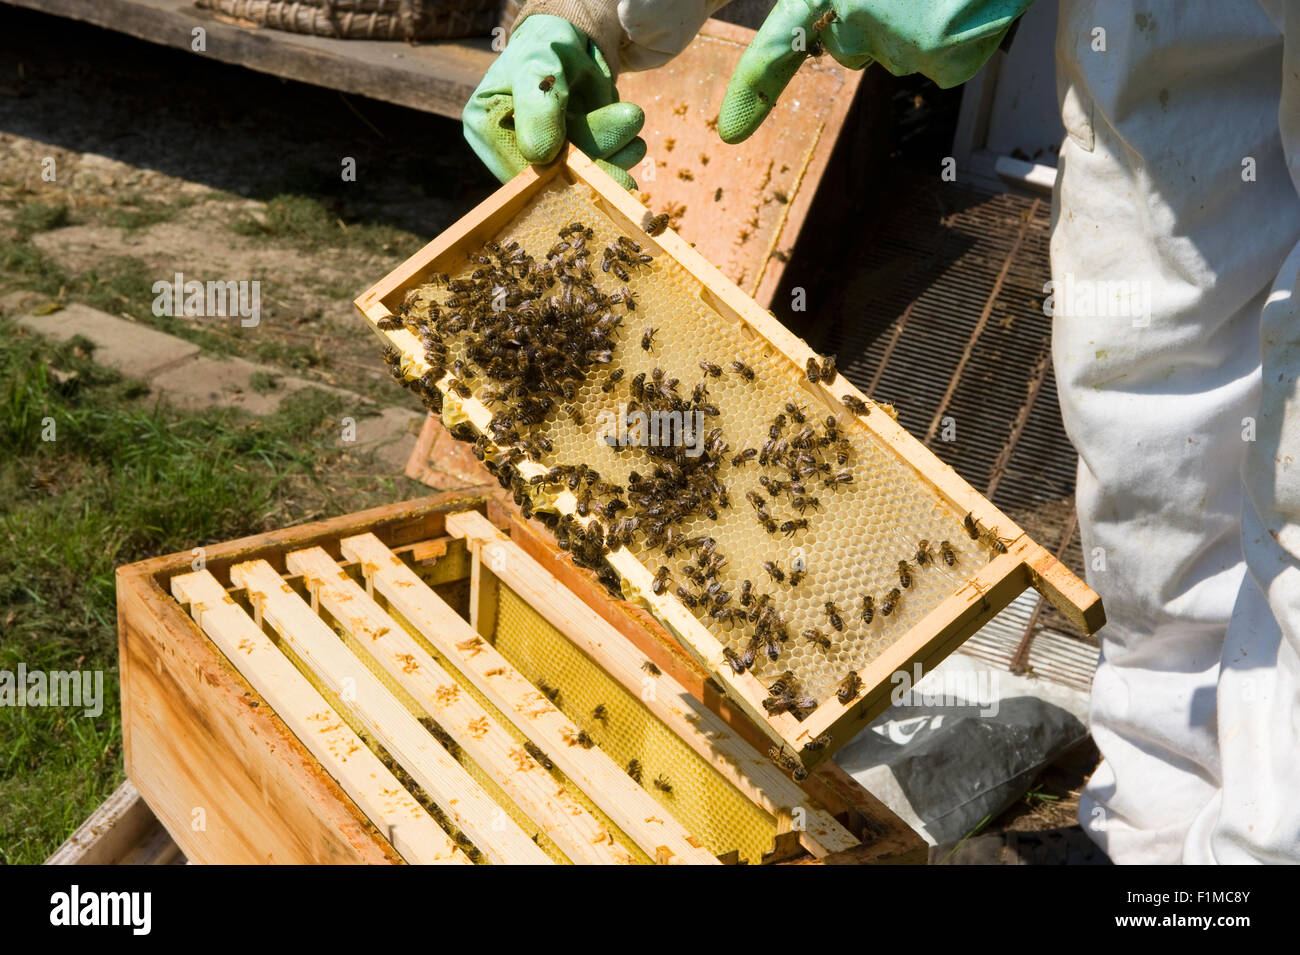 LIEVELDE, THE NETHERLANDS - AUG 08, 2015: An apiarist is checking the frame of a honeycomb and wearing protective clothes Stock Photo